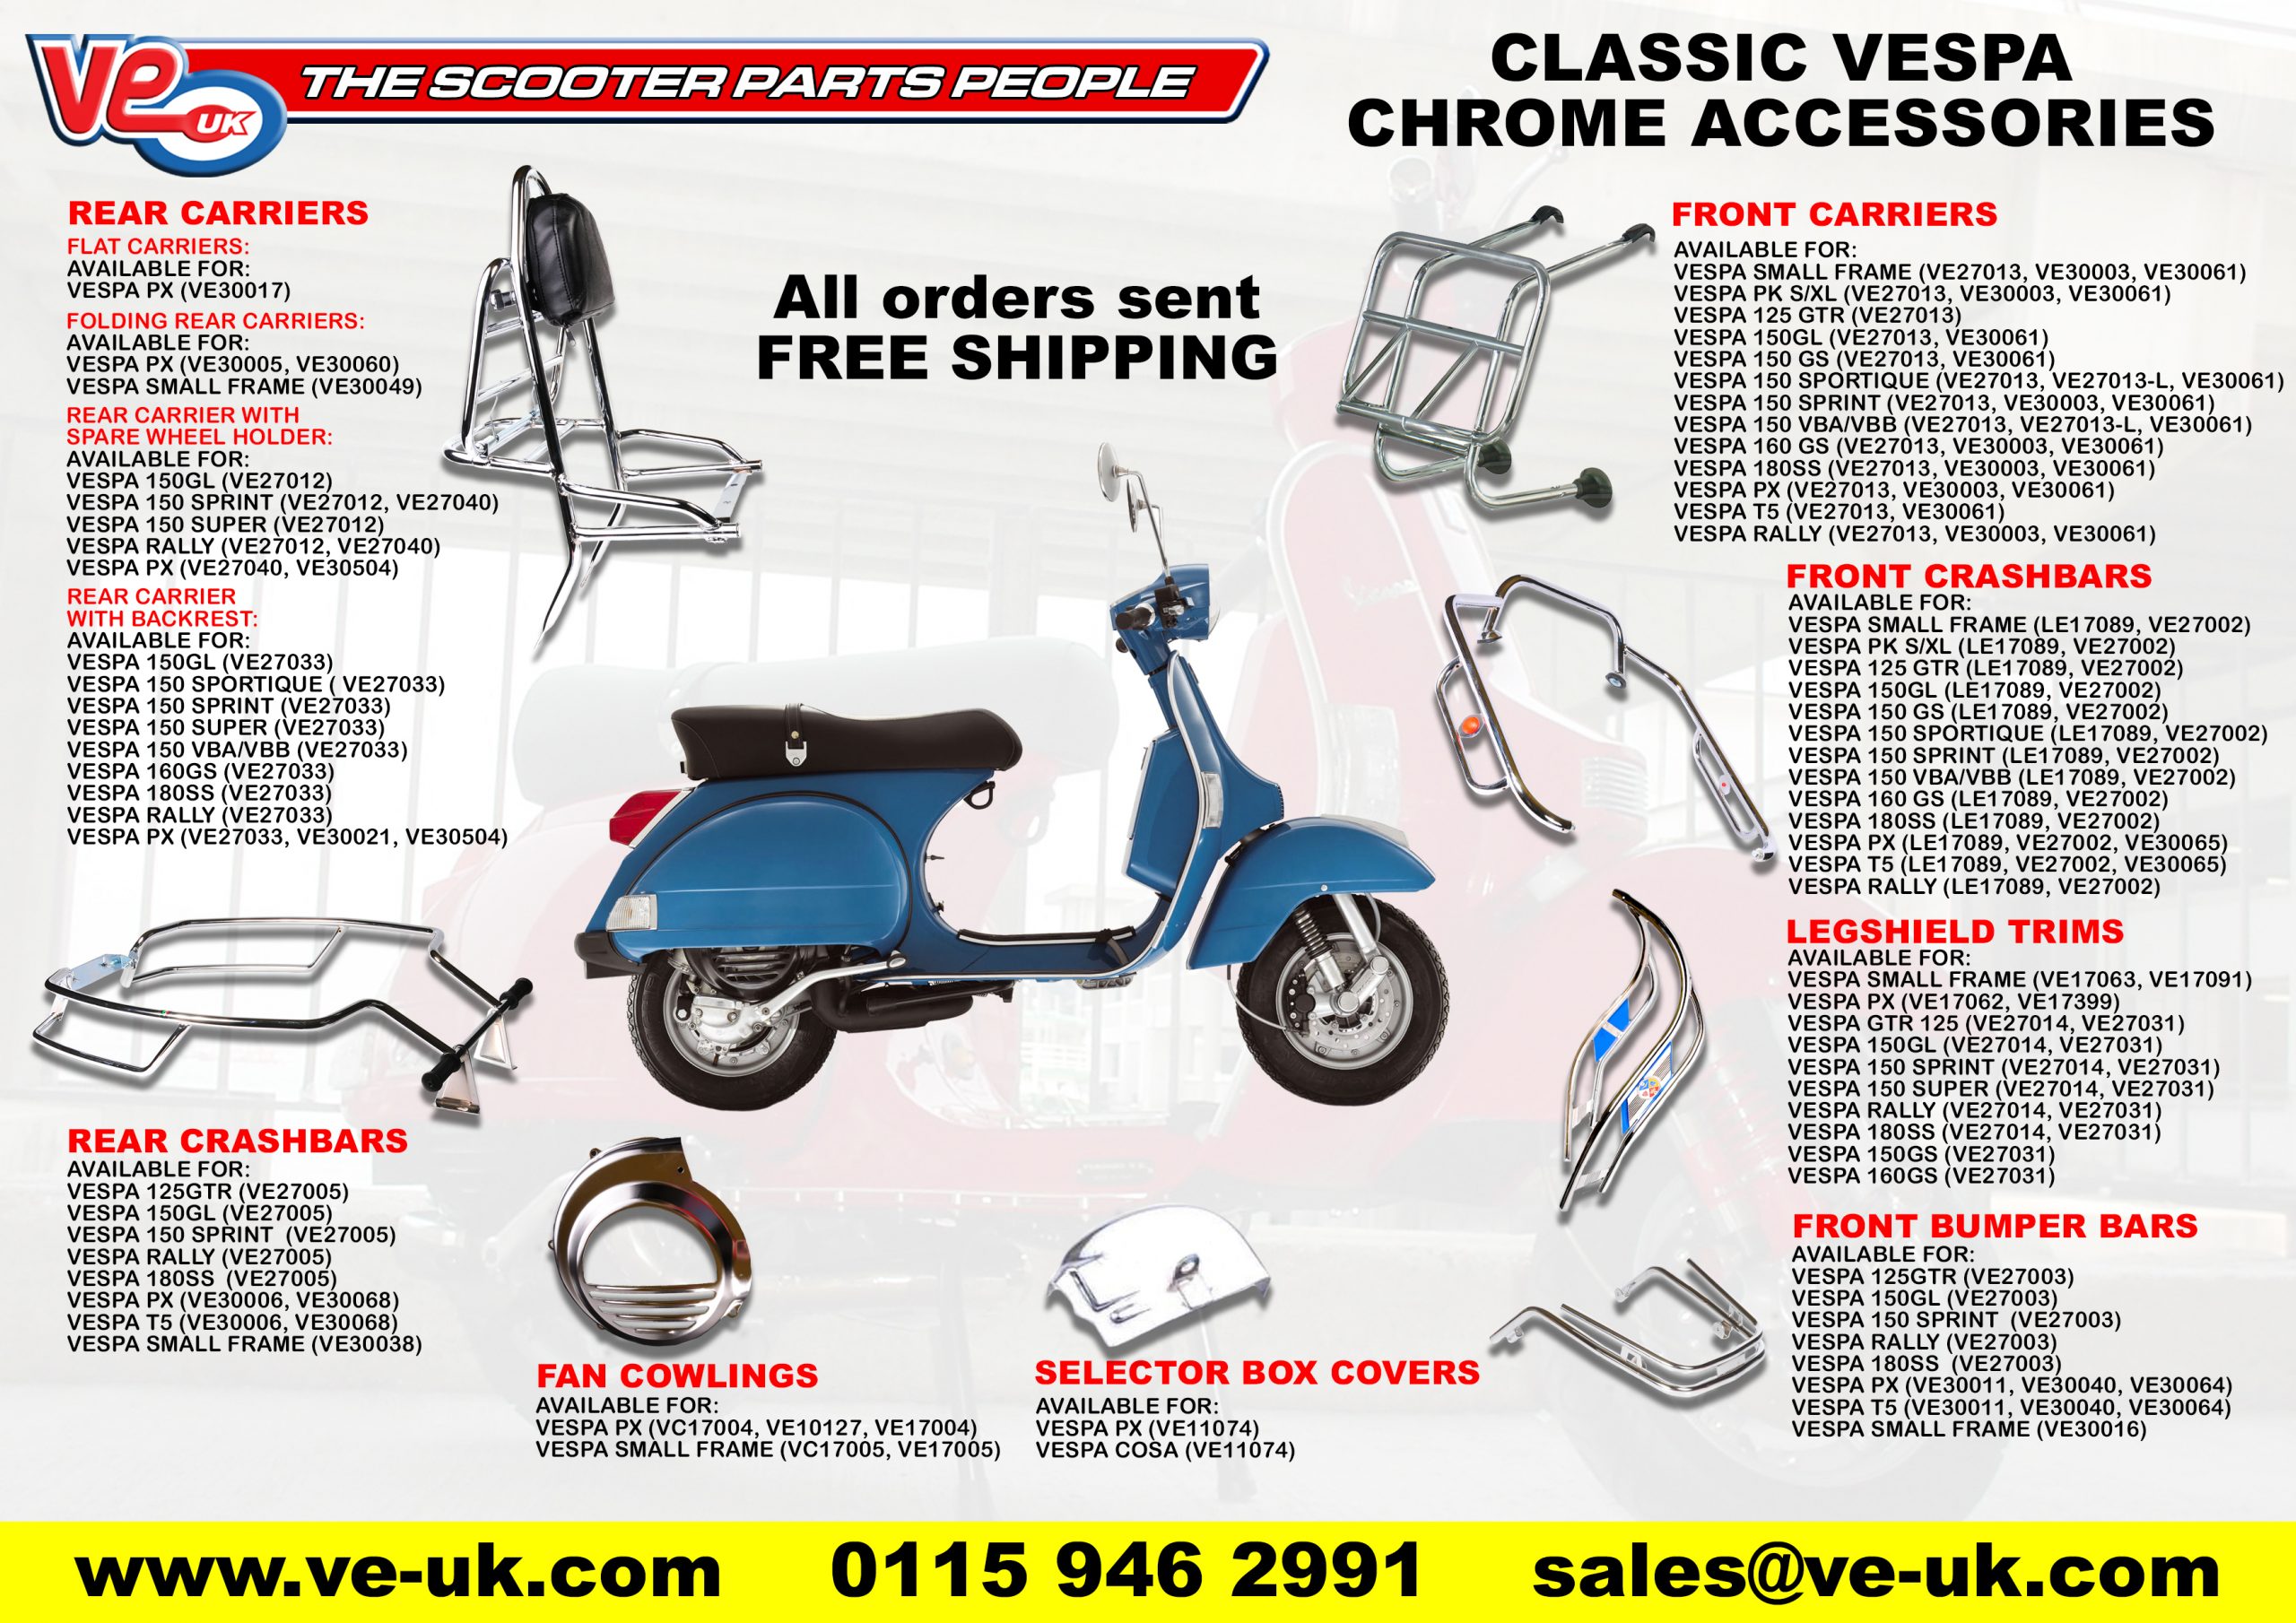 VE UK – Scooter Parts People